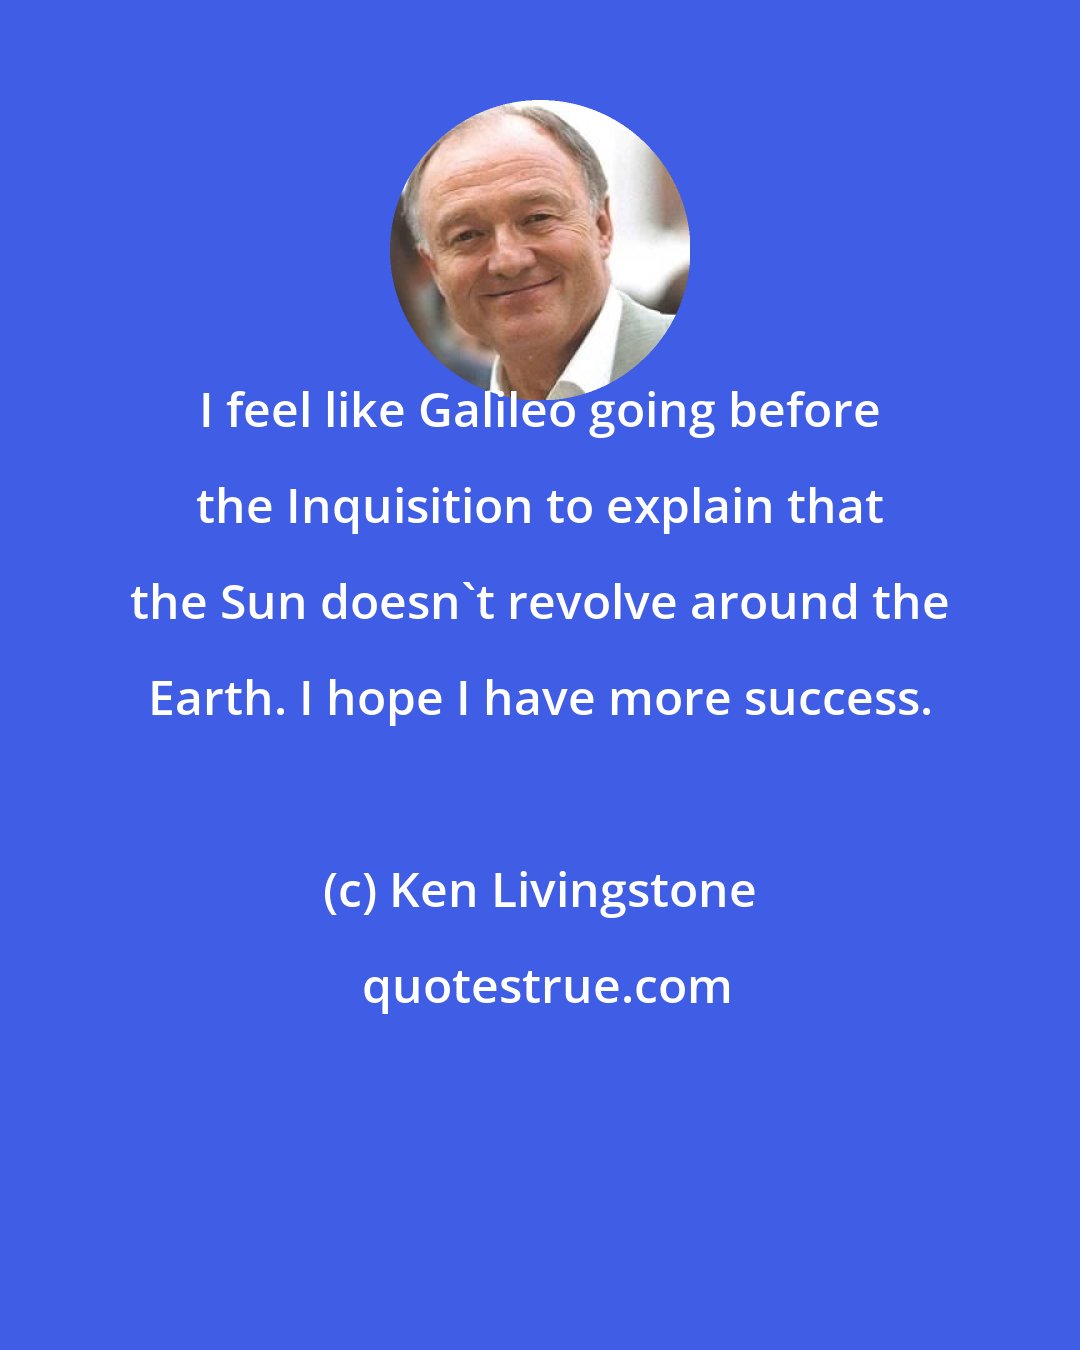 Ken Livingstone: I feel like Galileo going before the Inquisition to explain that the Sun doesn't revolve around the Earth. I hope I have more success.